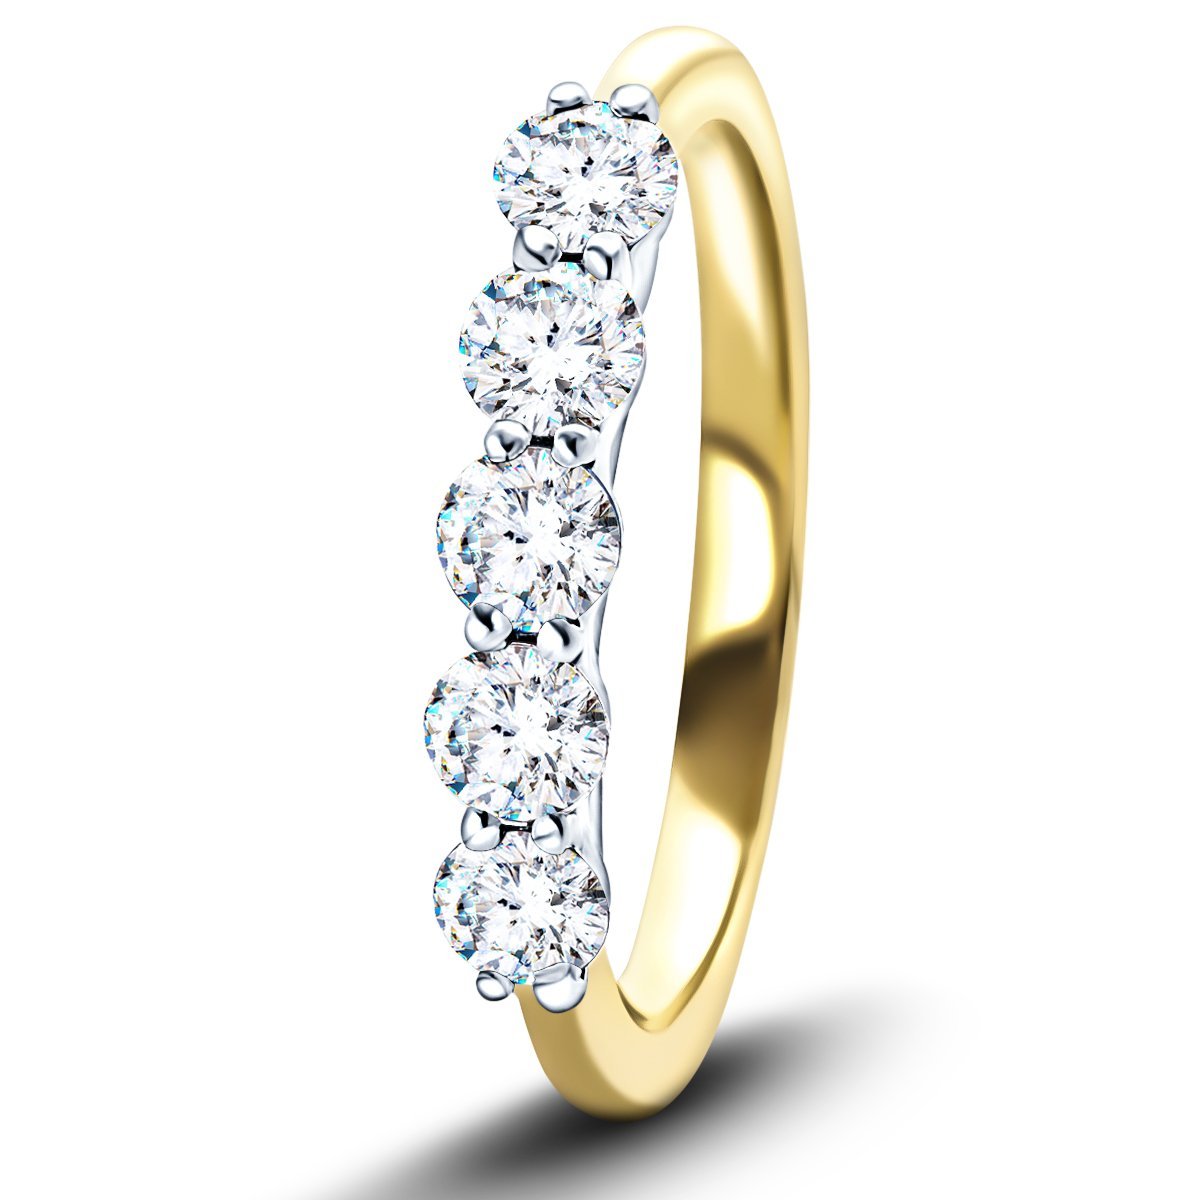 Five Stone Diamond Ring with 1.50ct G/SI Quality in 18k Yellow Gold - All Diamond